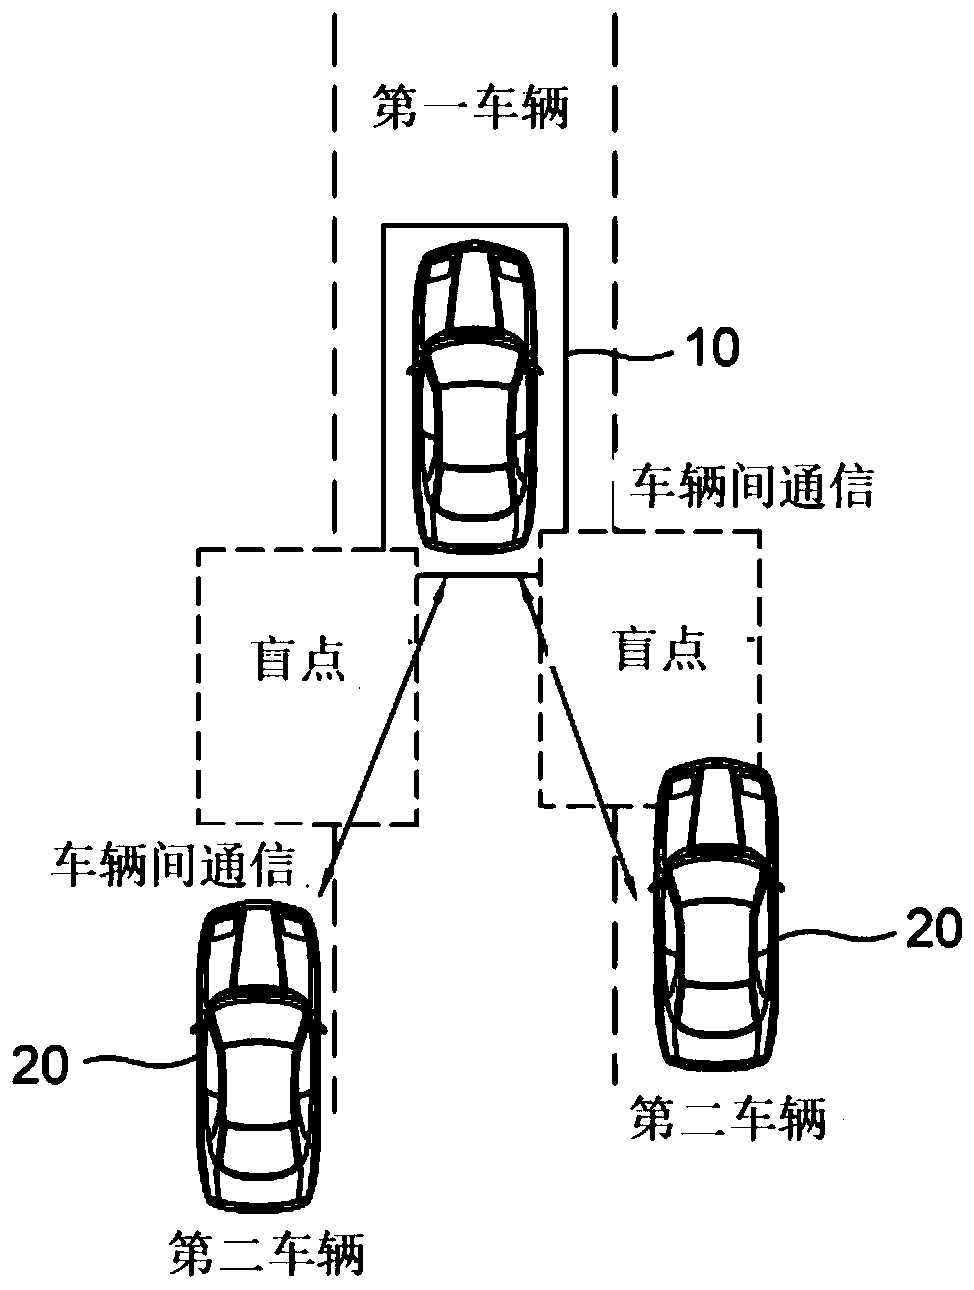 Blind spot warning method and device based on cooperation of inter-vehicle communication